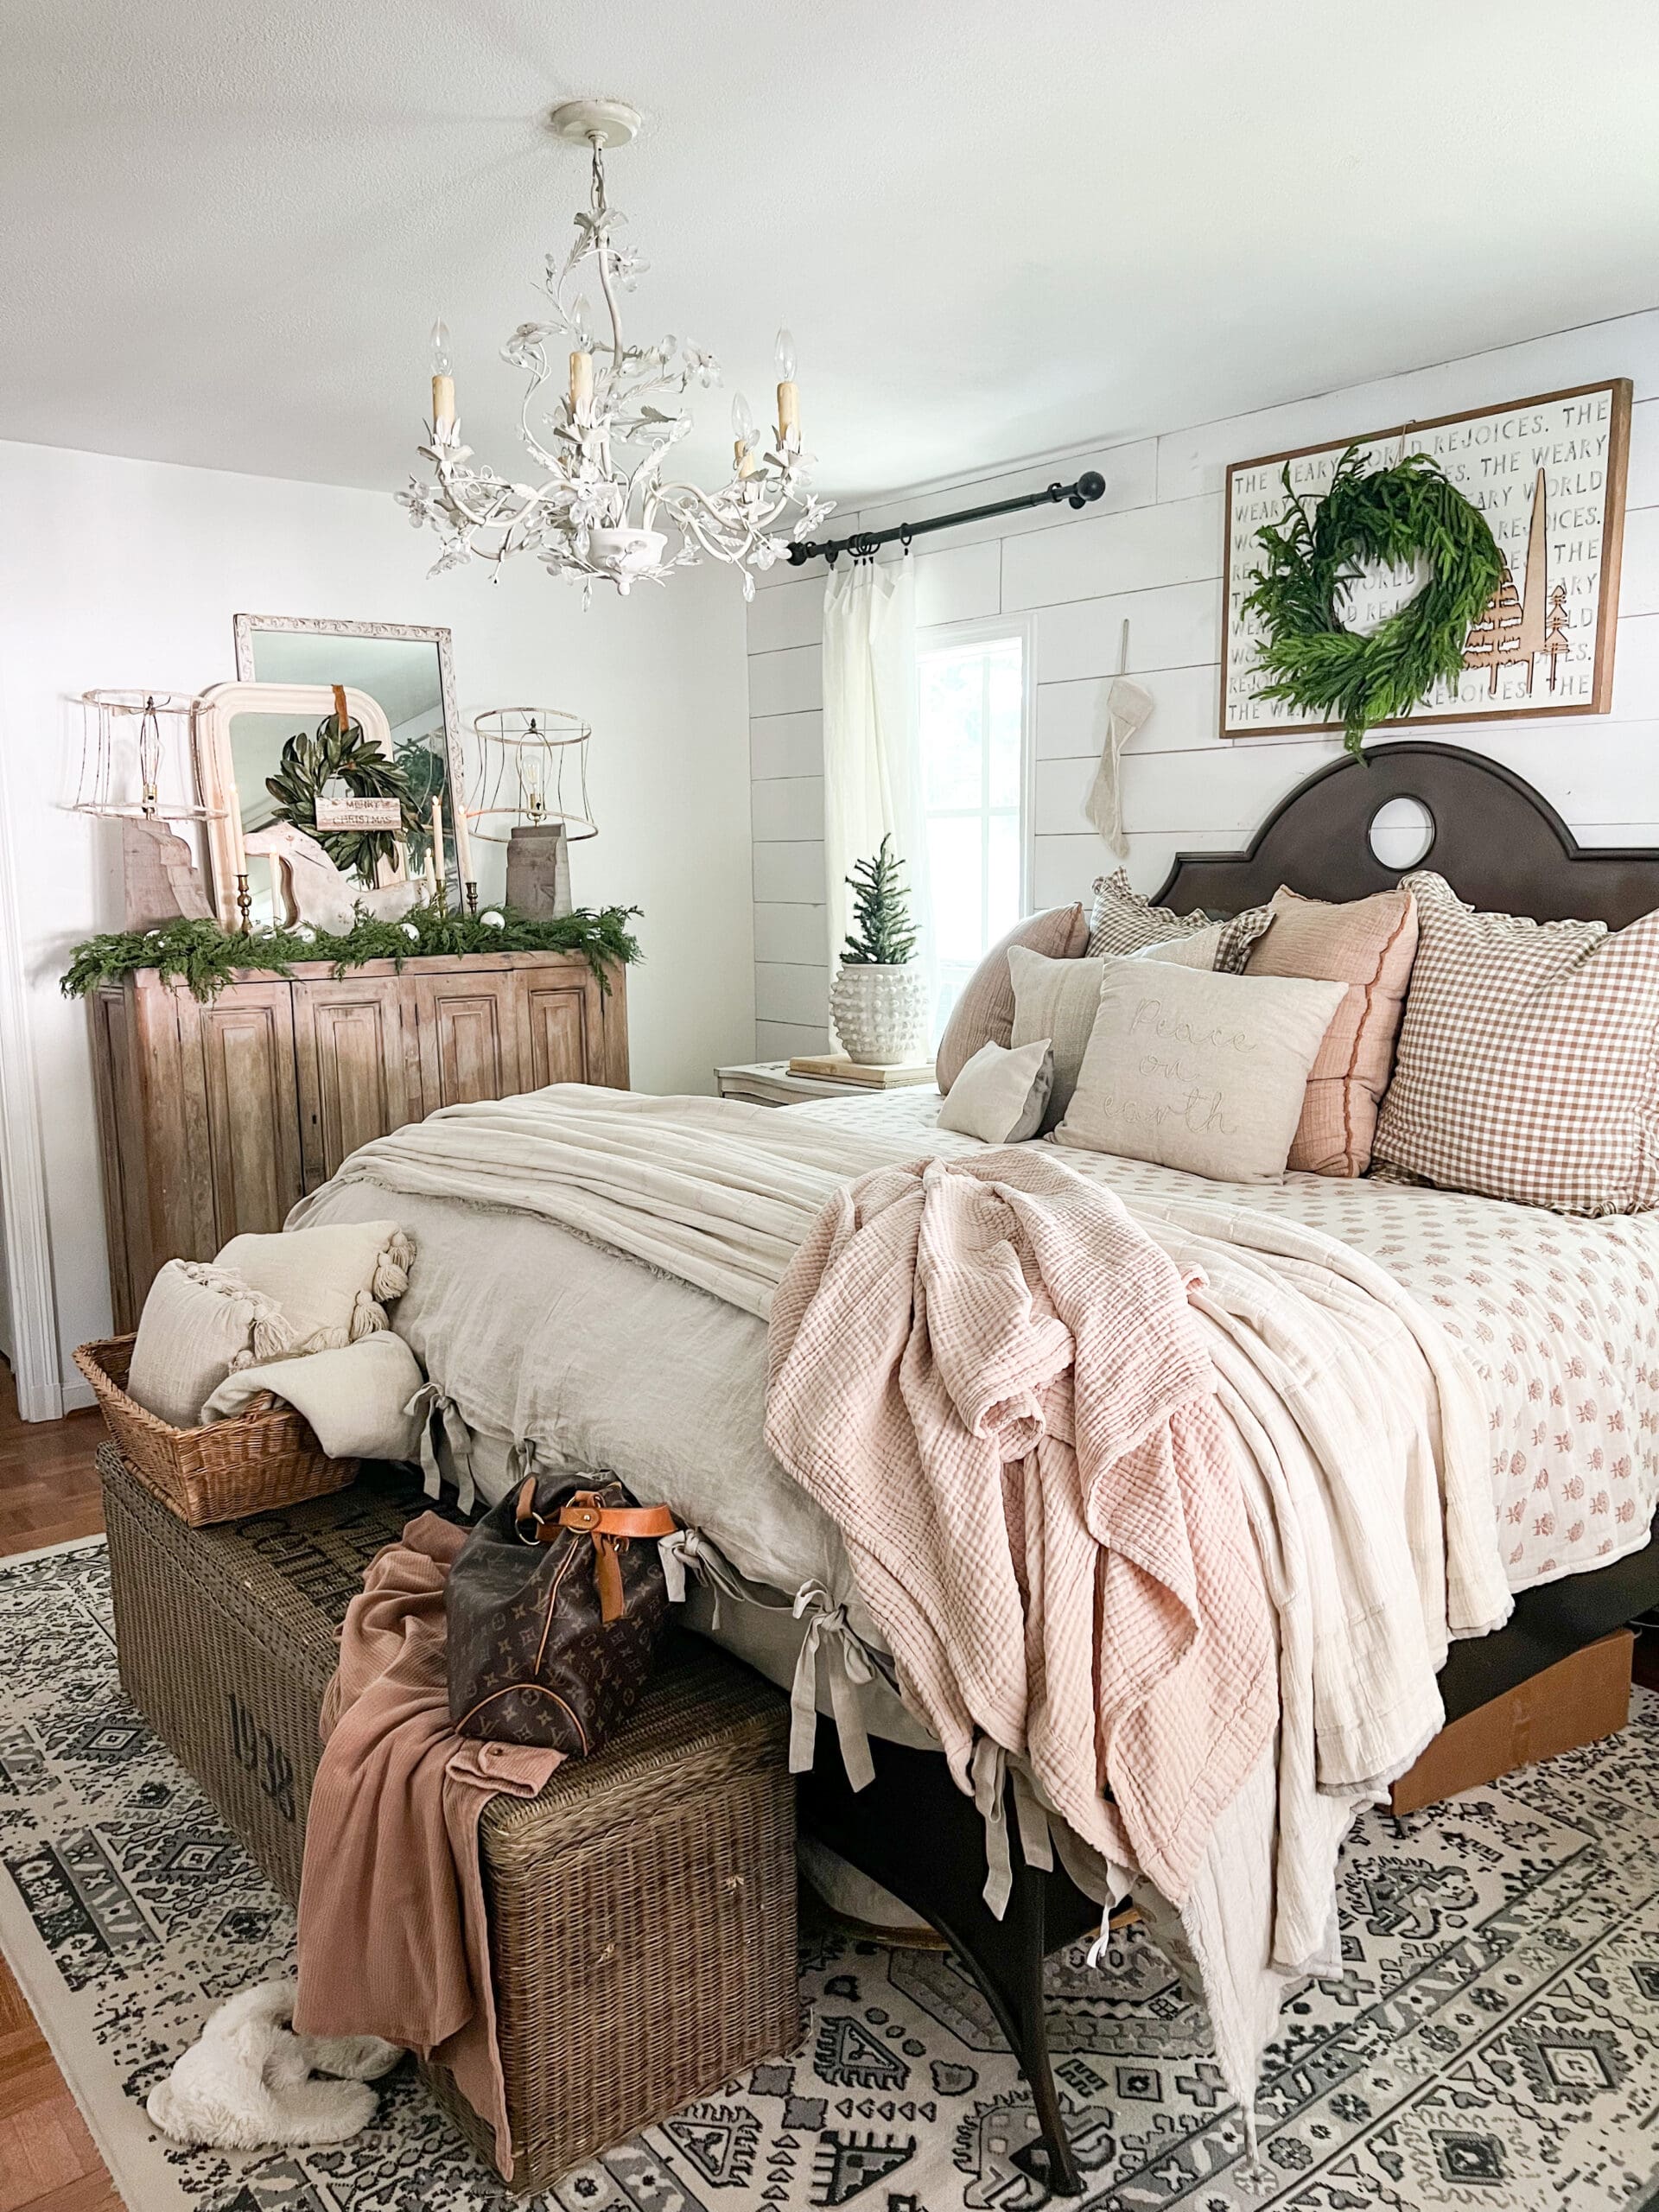 overview of a cozy bedroom styled for Christmas